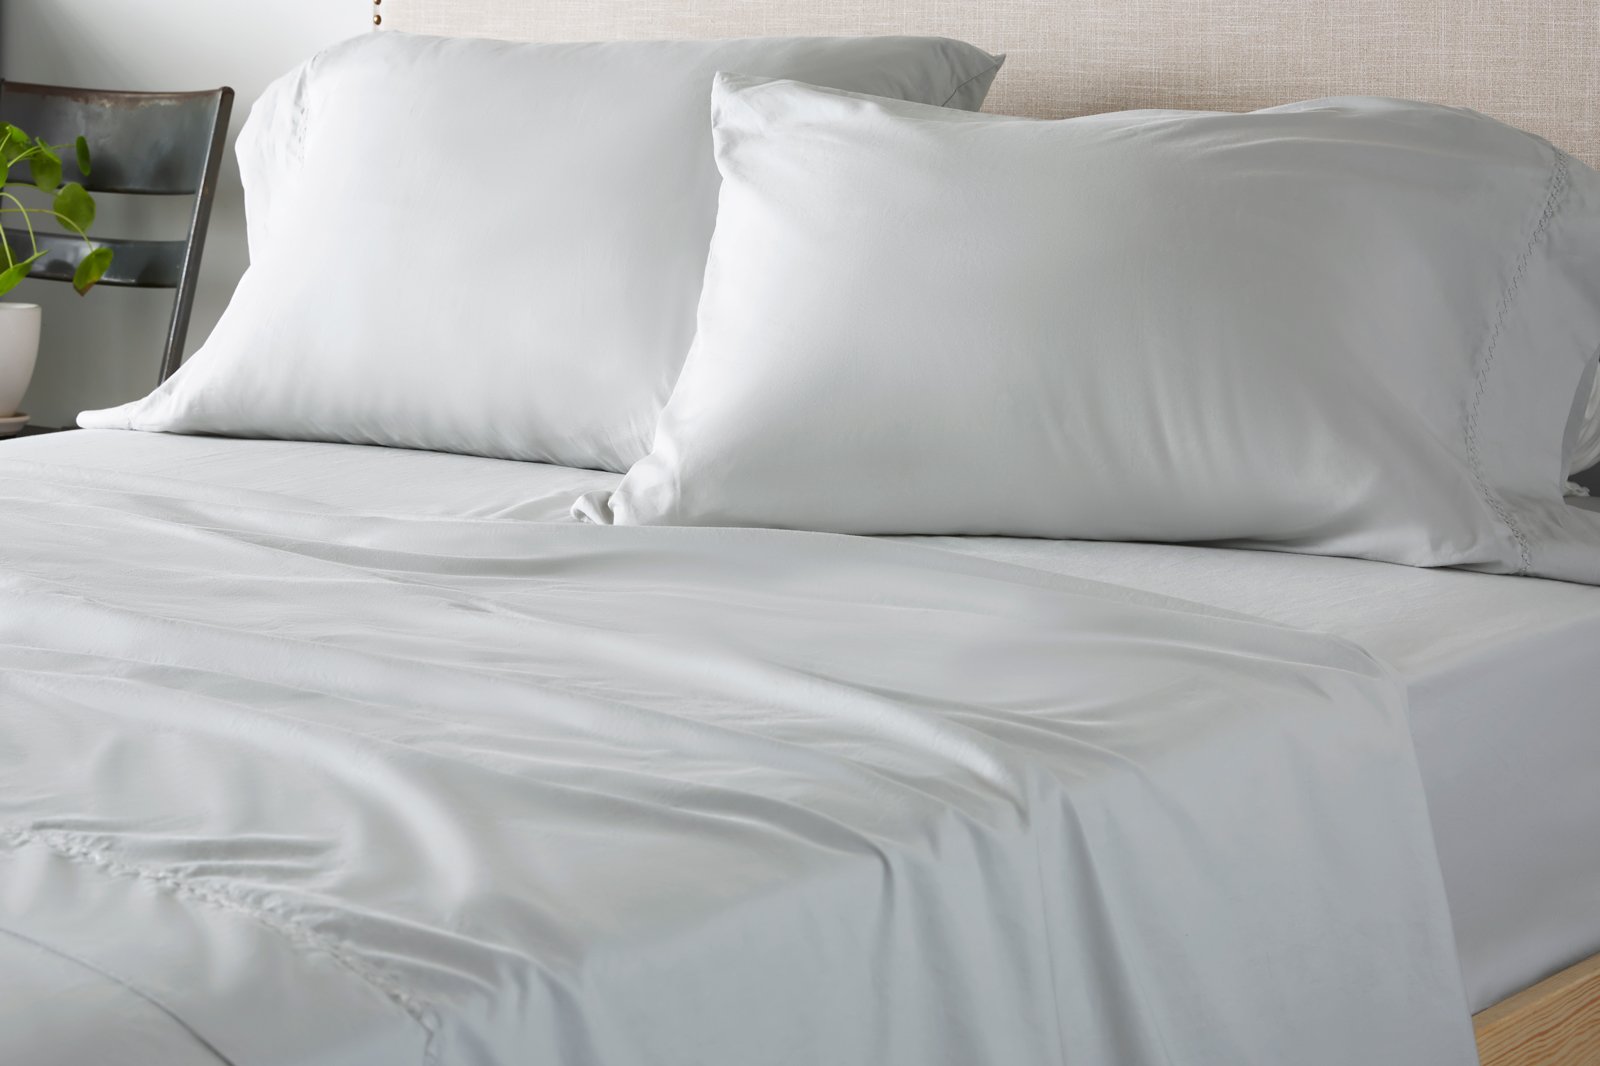 Allswell Organic Garment Wash Percale Sheet Set - image 3 of 5